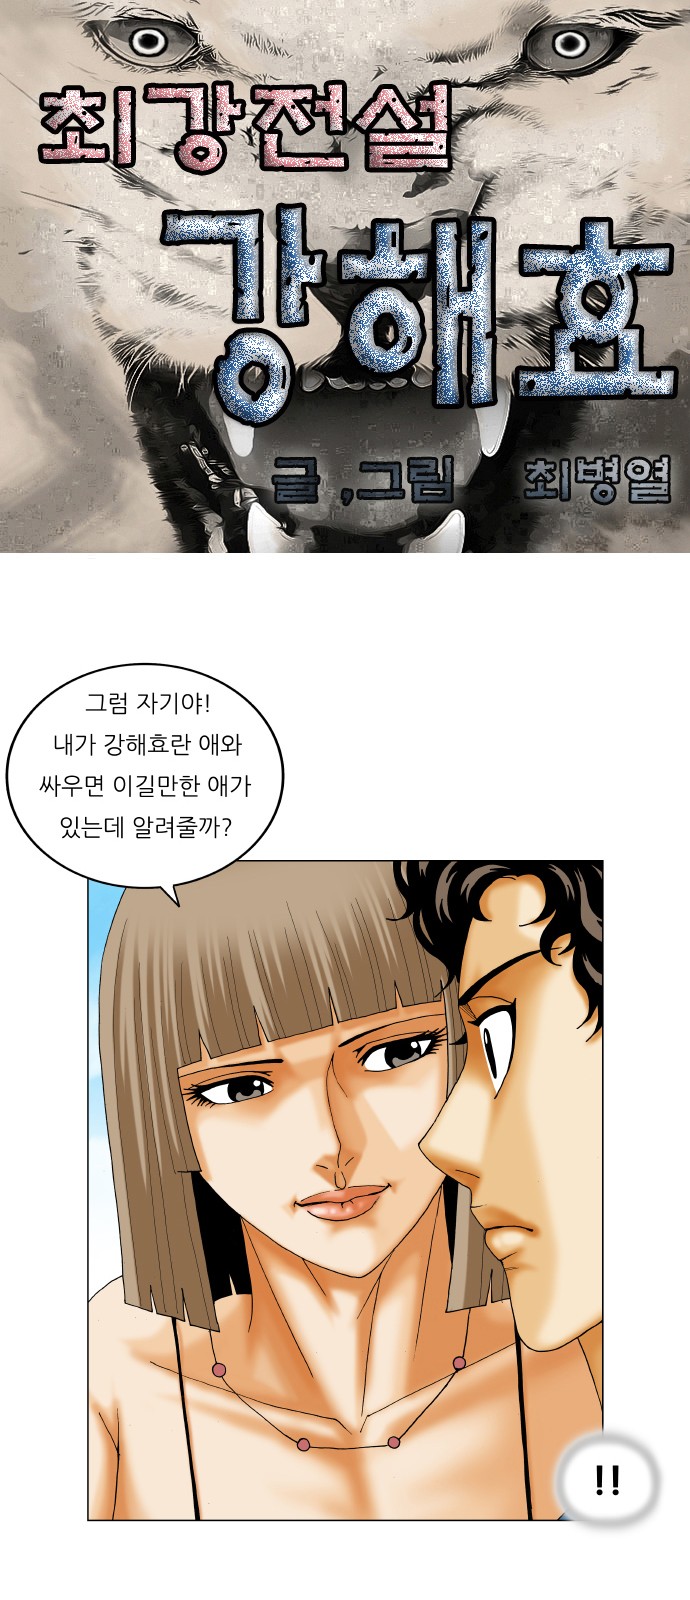 Ultimate Legend - Kang Hae Hyo - Chapter 218 - Page 1